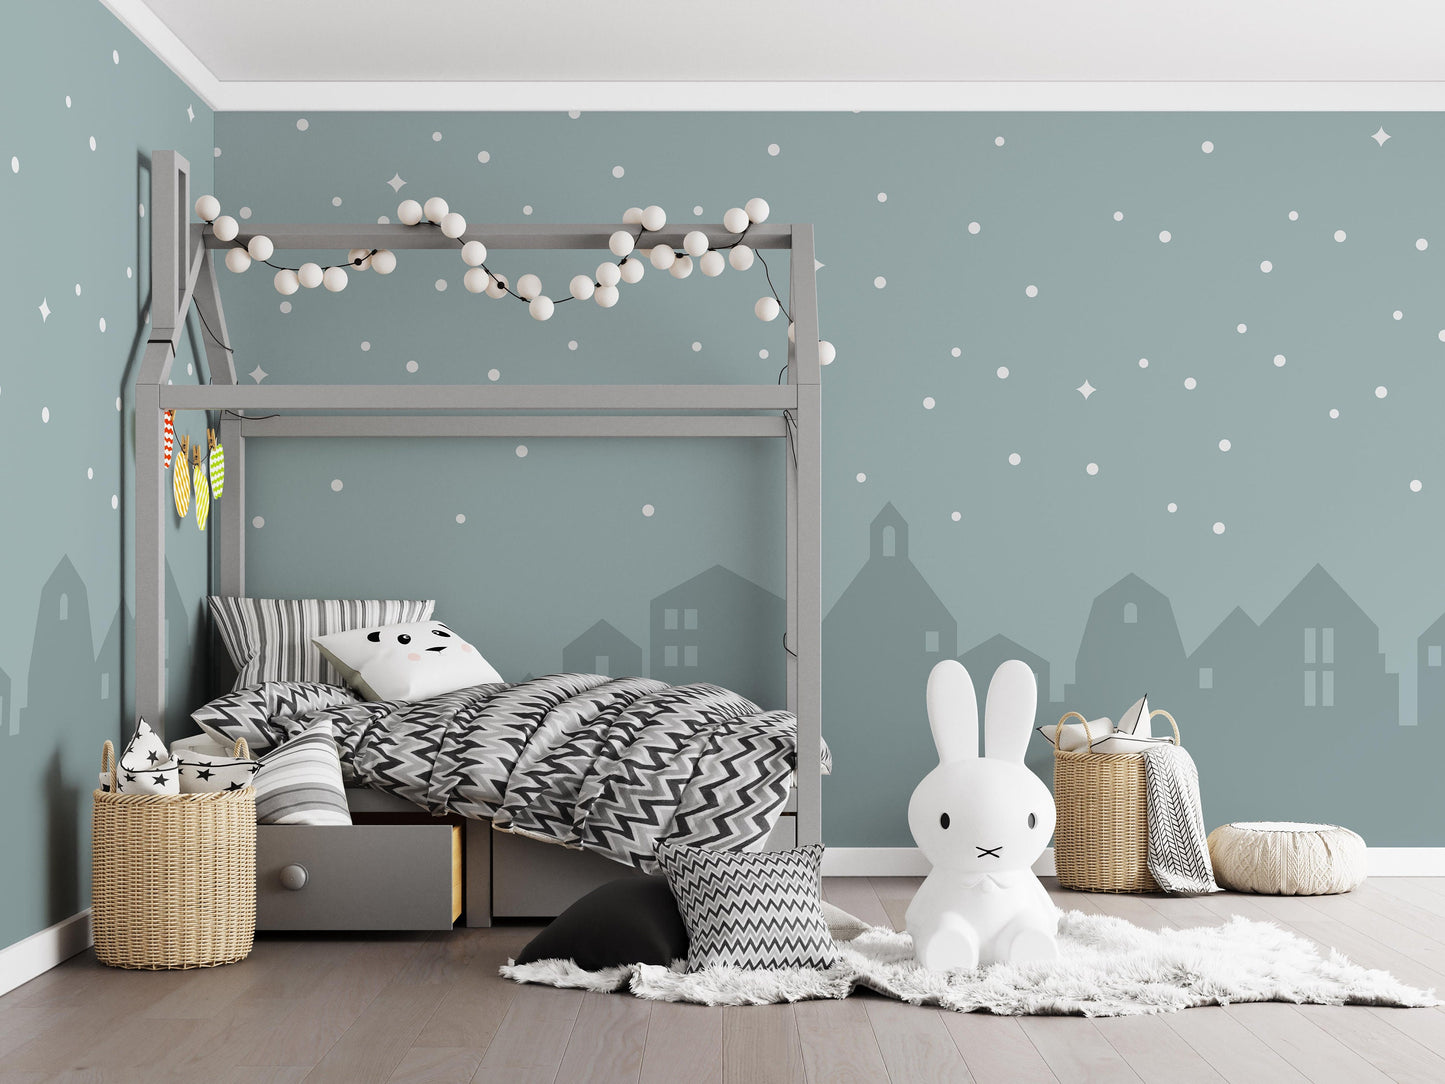 Removable Peel and Stick Wallpaper Town Houses Night Sky Nursery Wall Paper Wall Murals, KL0046